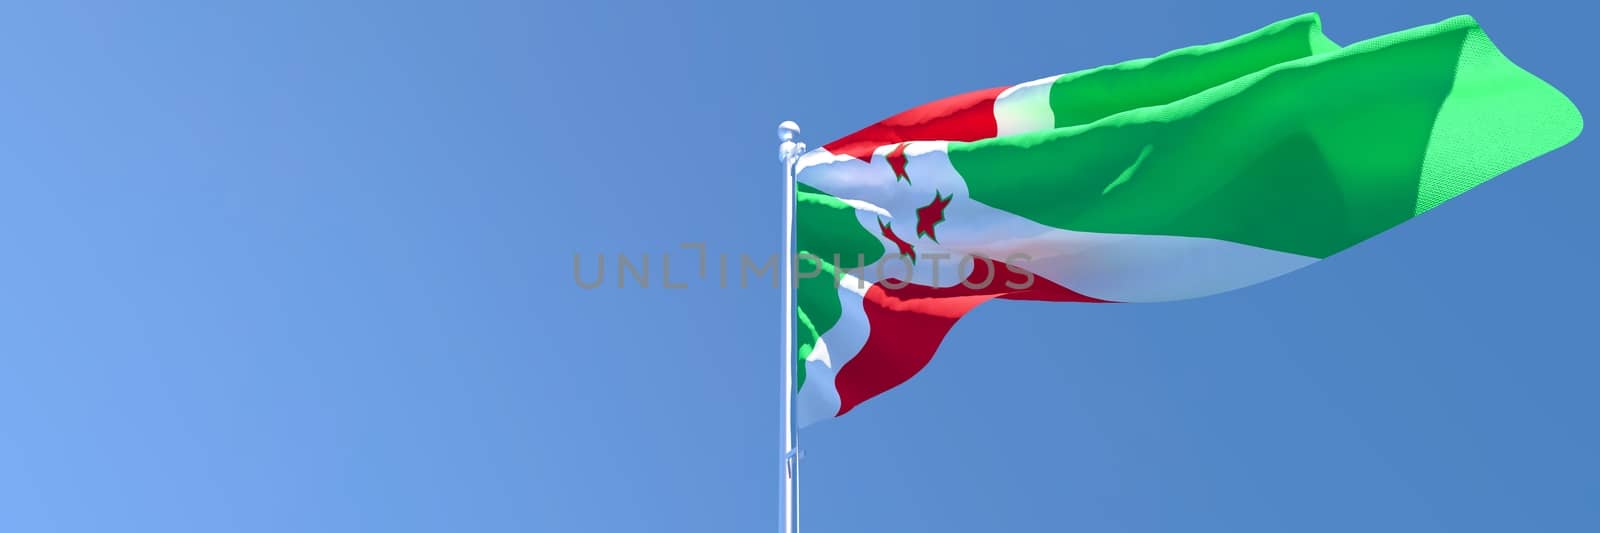 3D rendering of the national flag of Burundi waving in the wind by butenkow